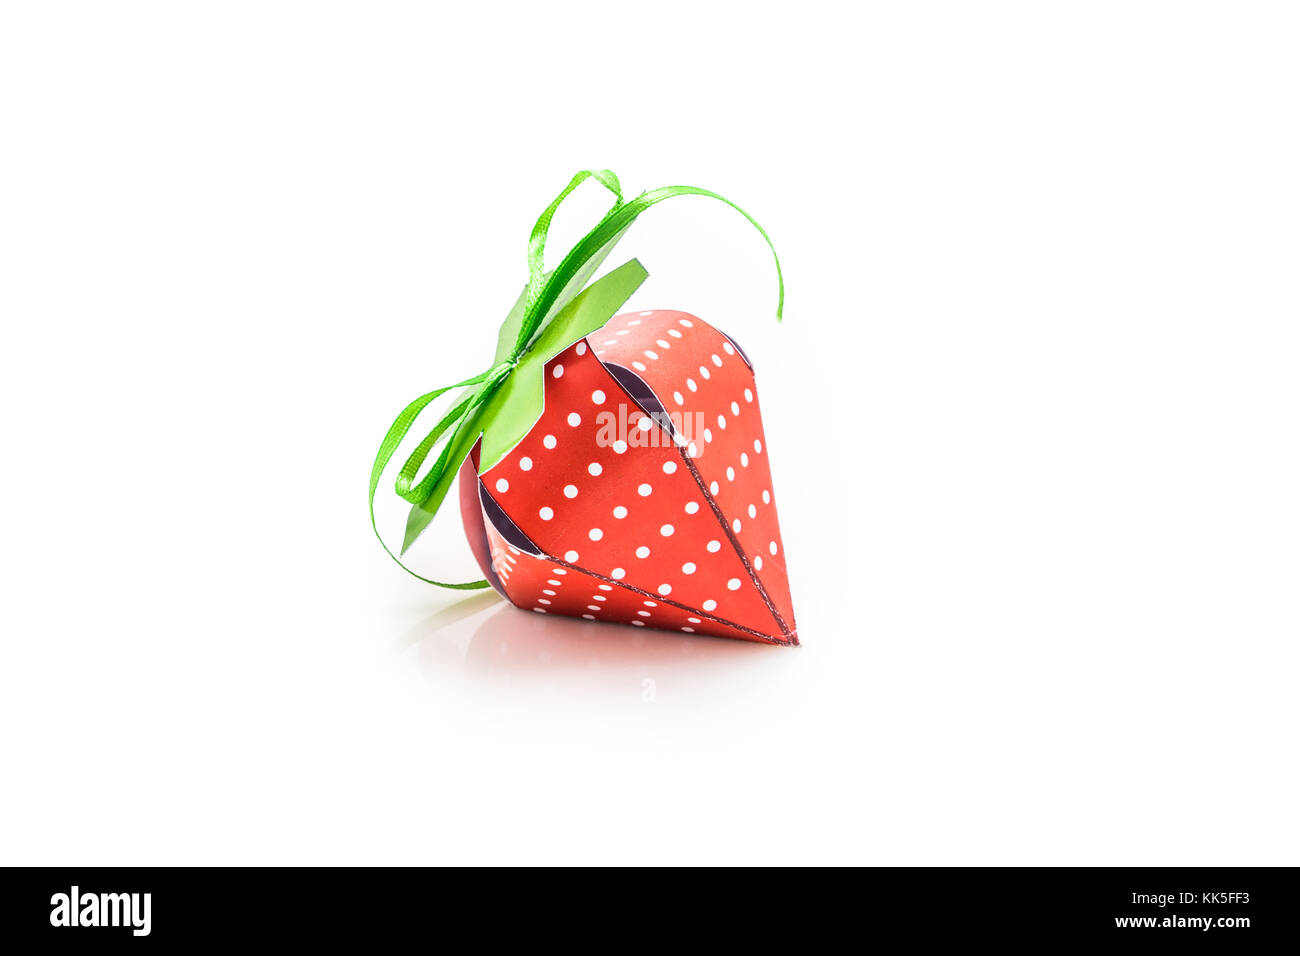 Strawberry made with Paper, studio shot on white background Stock Photo